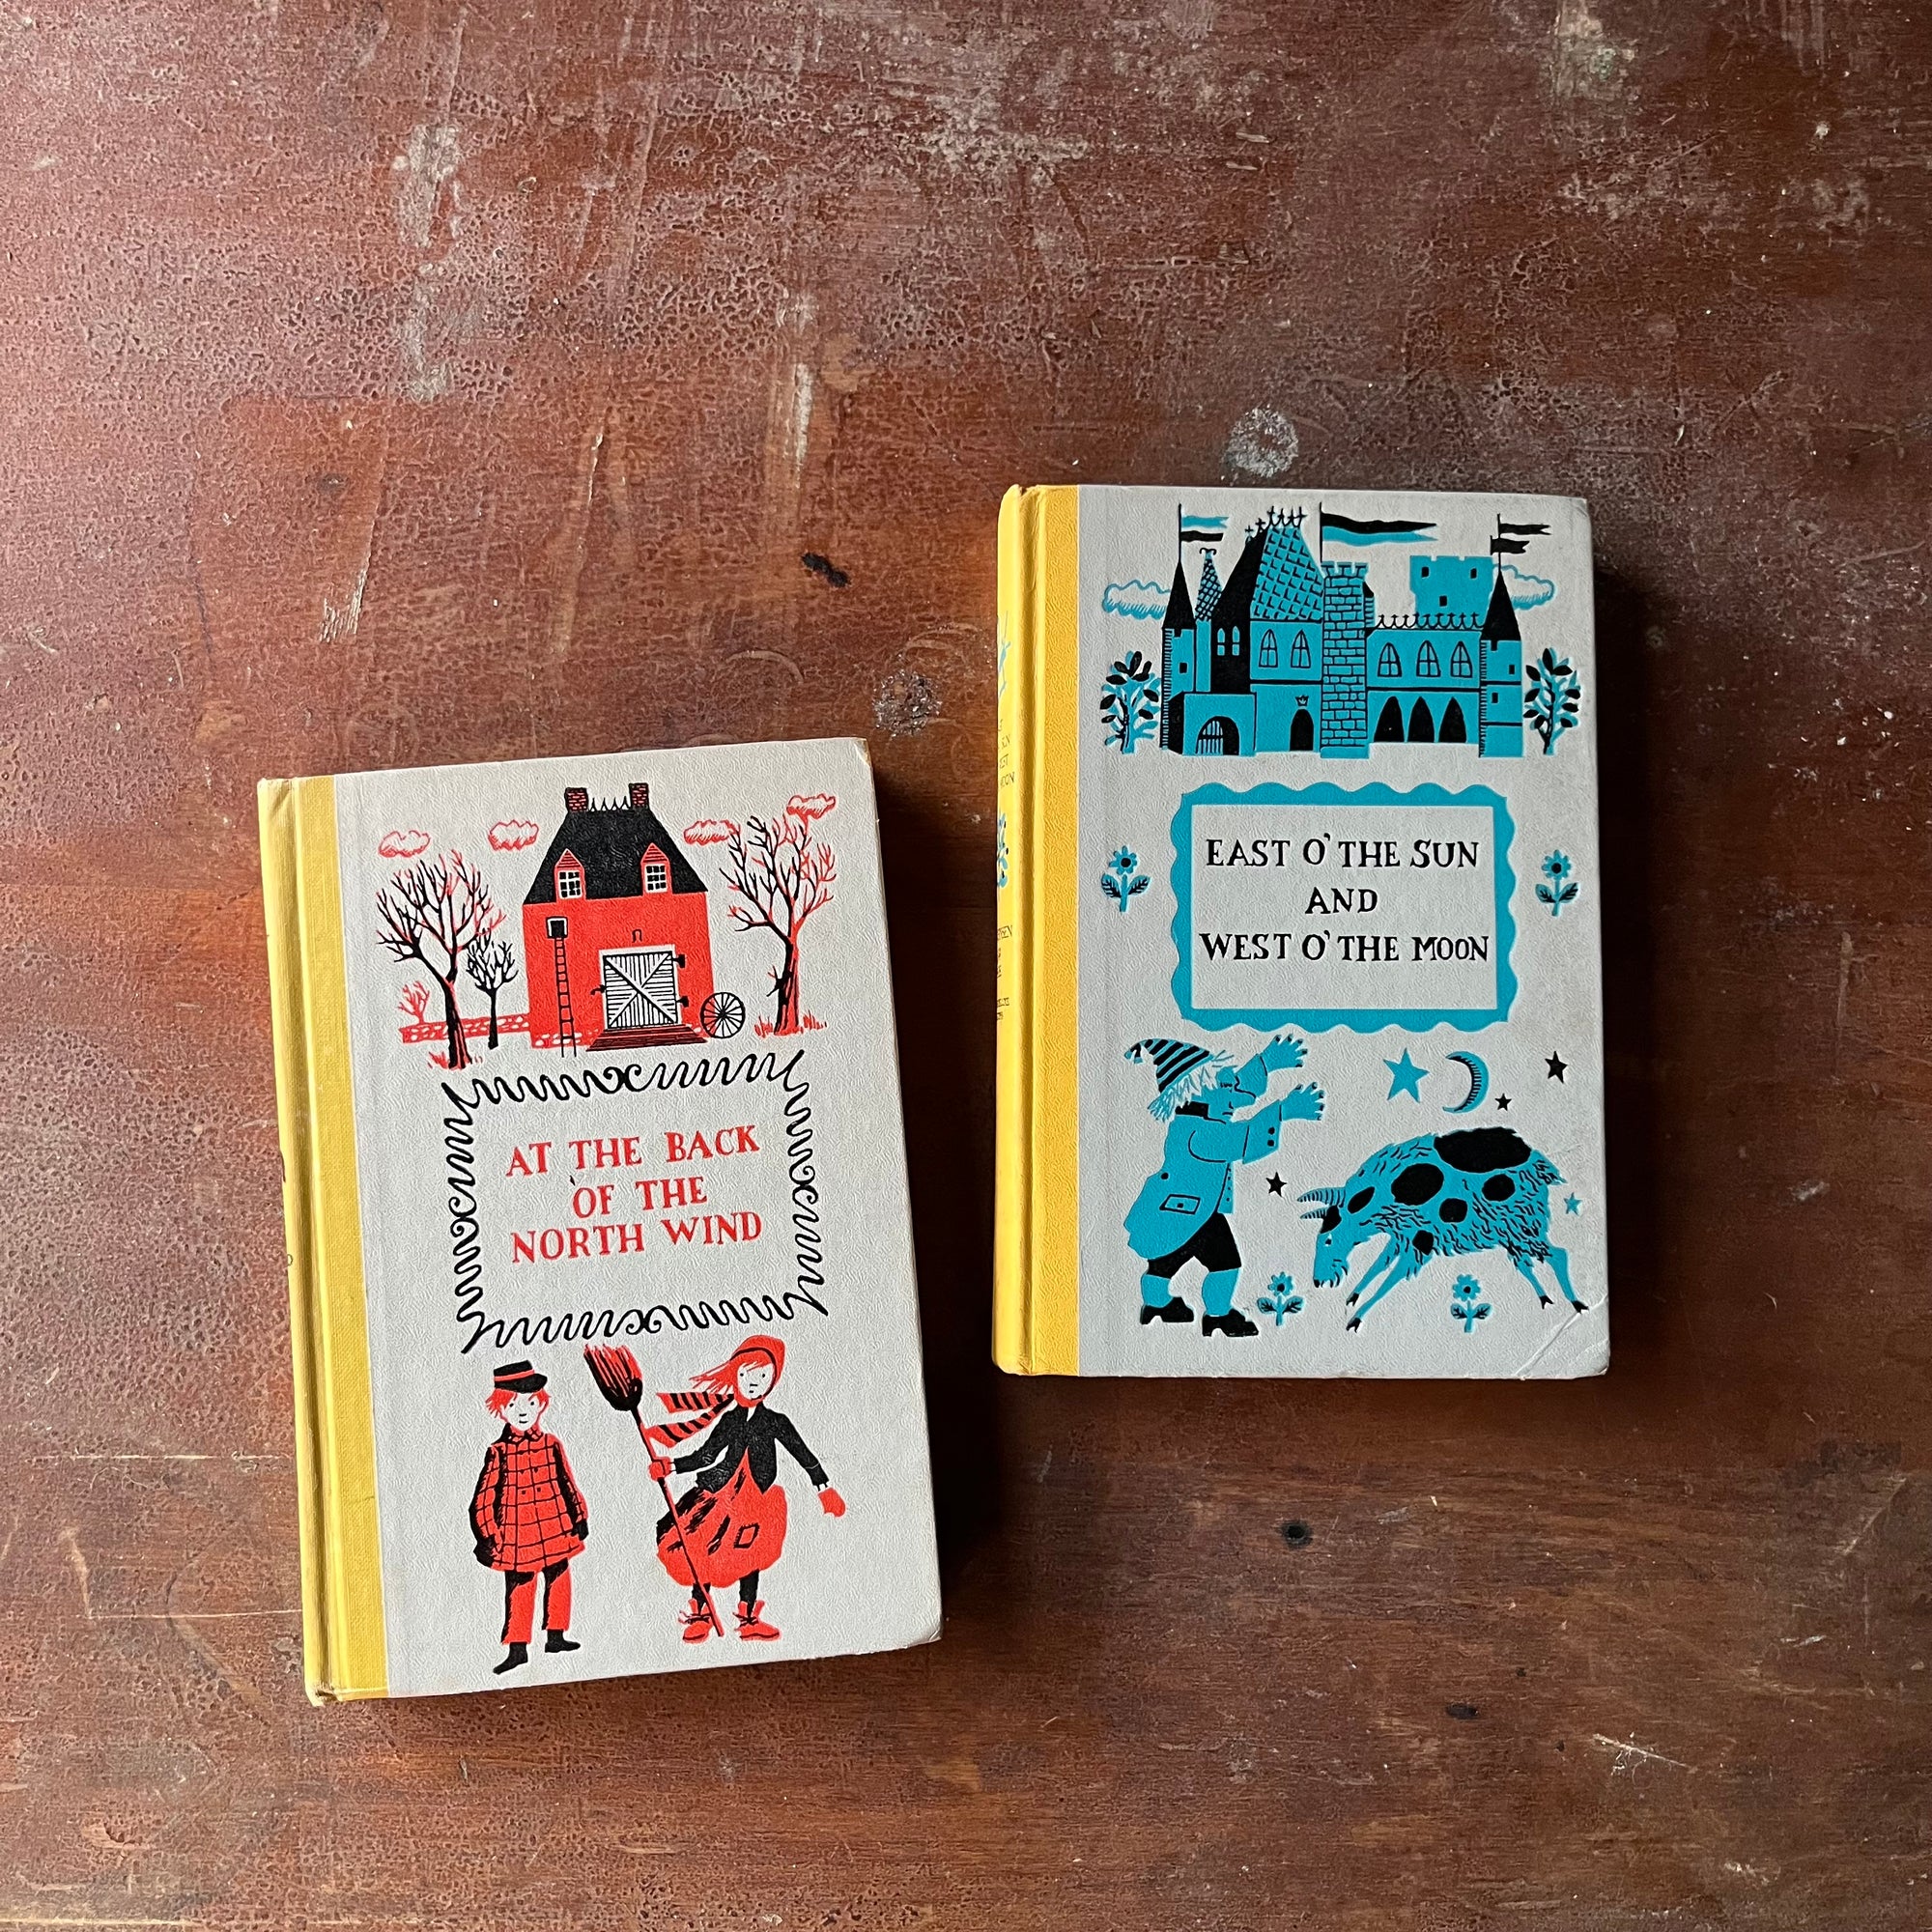 Pair of Junior Deluxe Editions-East O' The Sun and West O' the Moon and At The Back of the North Wind-vintage children's chapter books-view of the embossed front covers 